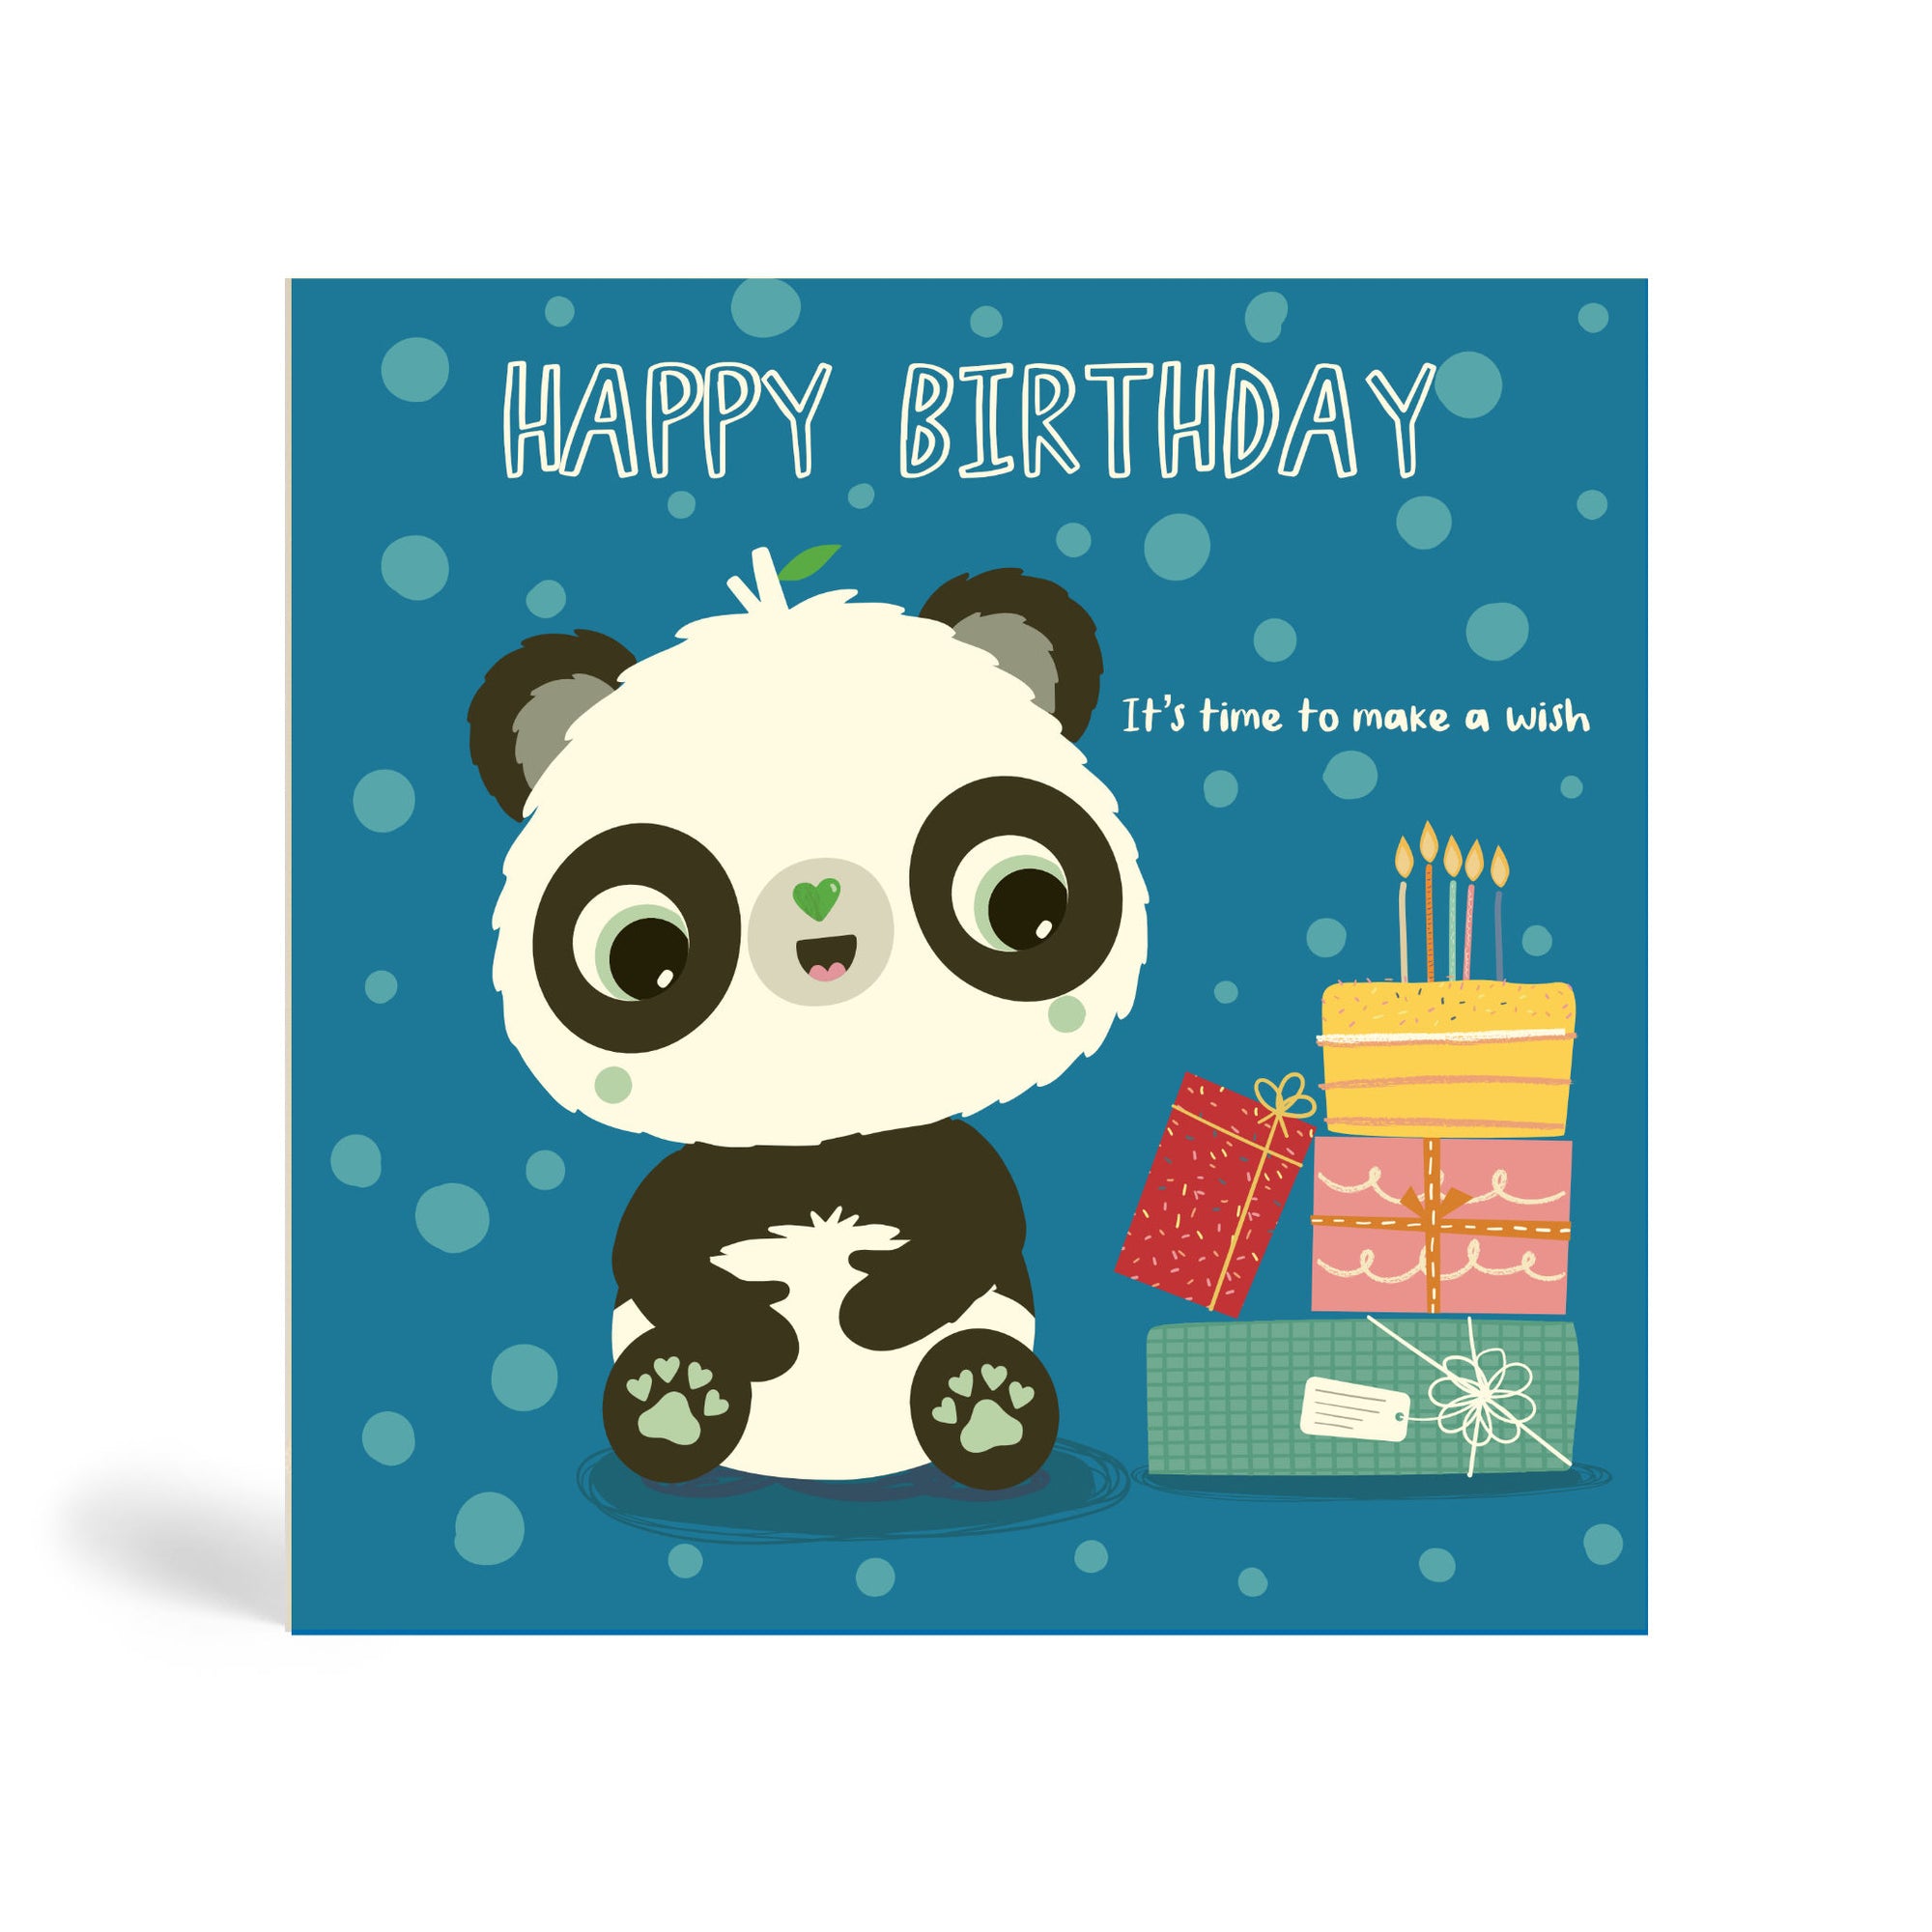 Blue with circle pattern background 150mm square eco-friendly, tree free, birthday greeting card showing Panda sitting beside a pile of present with birthday cake and candles on top. The card says, Happy Birthday. It’s time to make a wish.